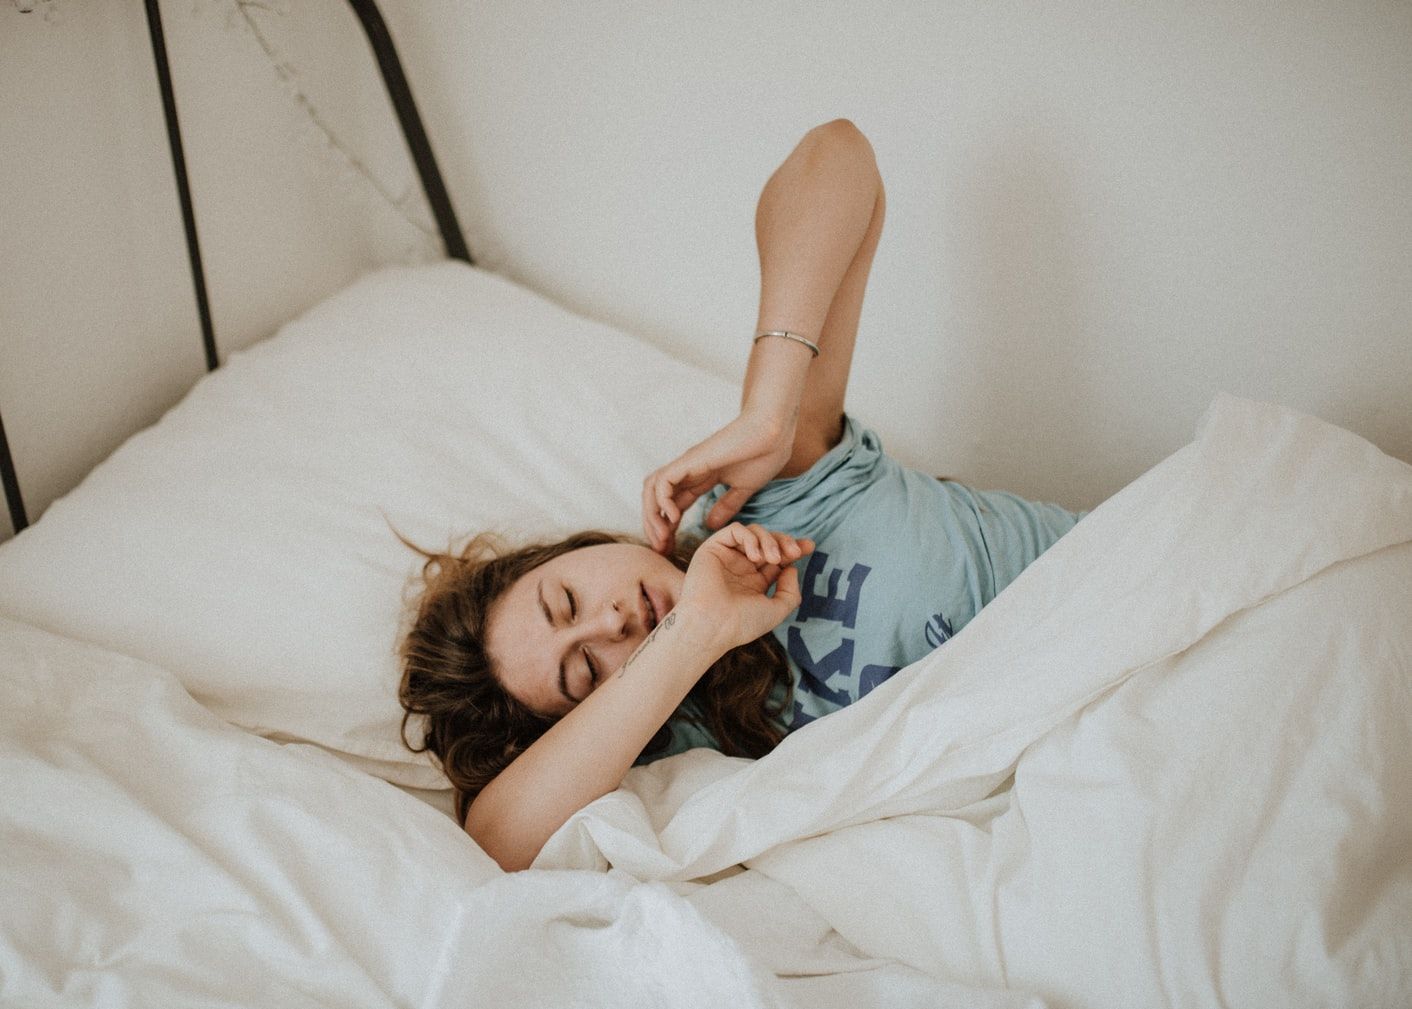 Waking Up Tired? 5 Thing You Need to Know